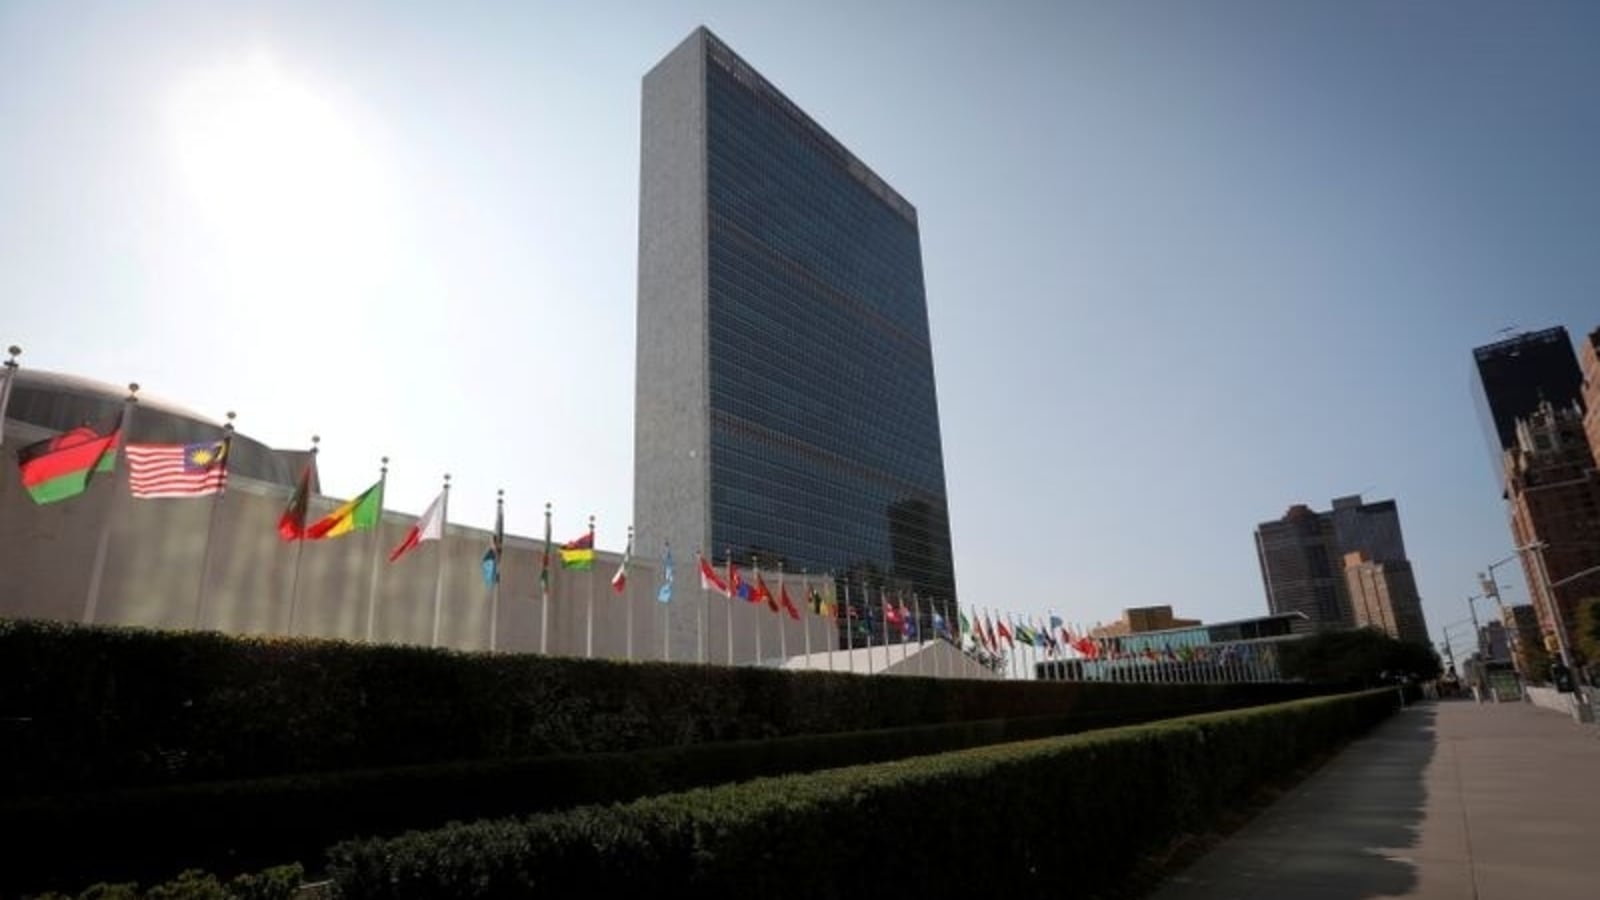 Action-packed week of UN General Assembly to begin. Here's what's on agenda